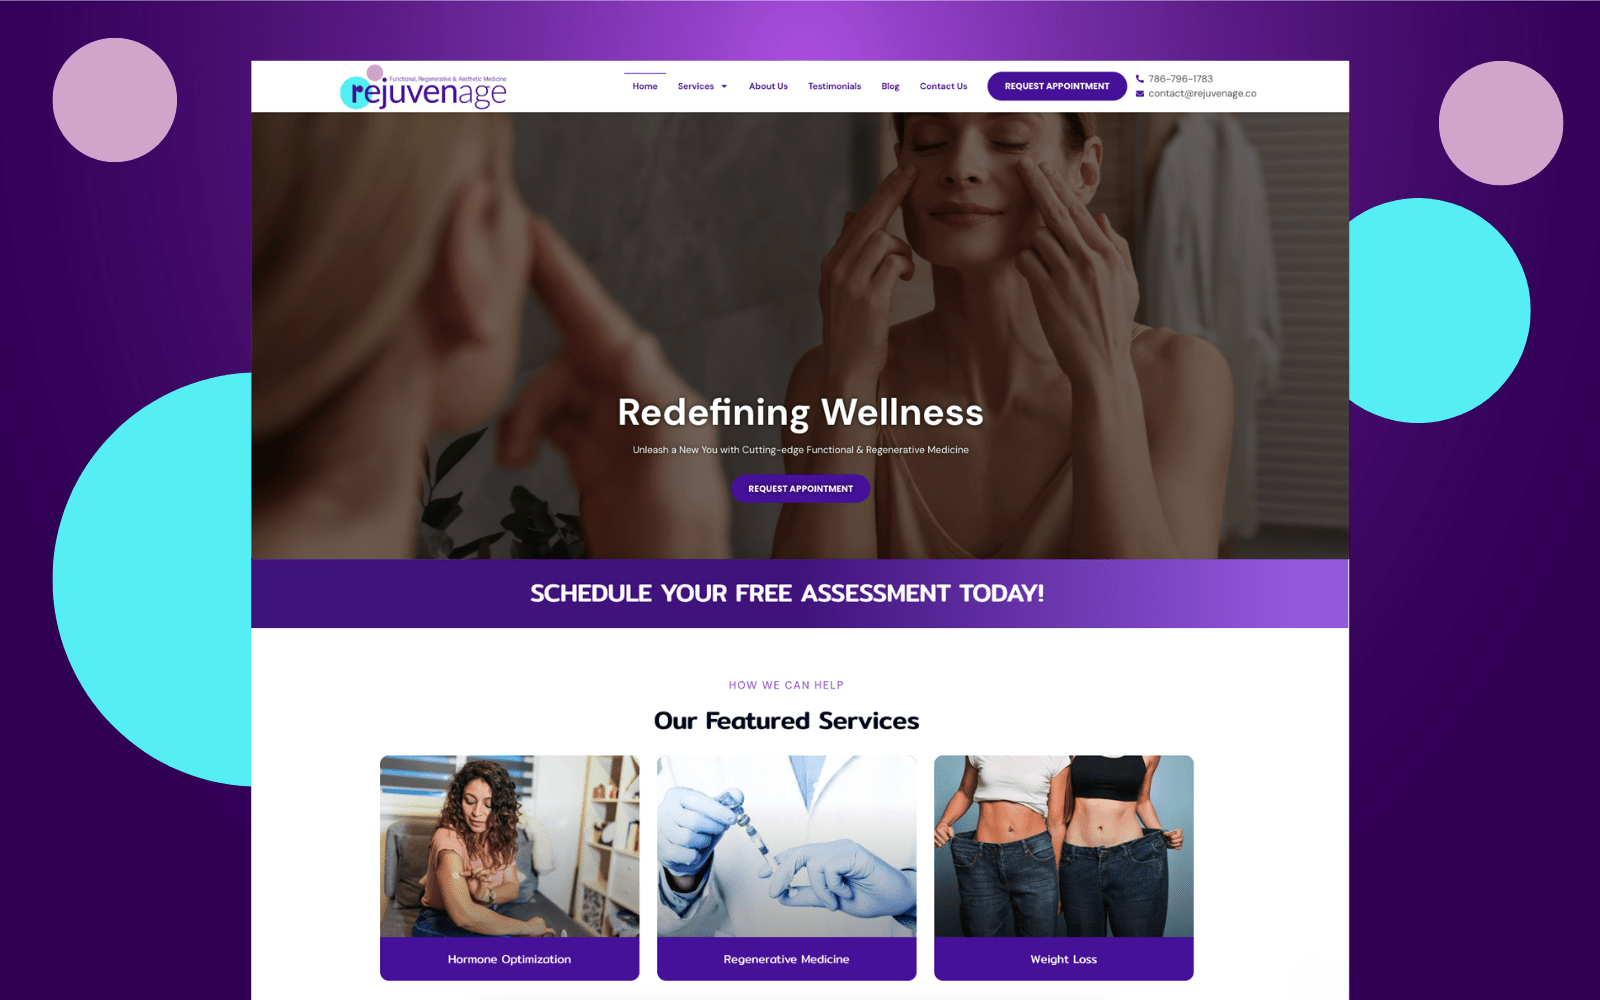 regenerative medicine website design: A clean and modern design showcasing various wellness remedies and services.